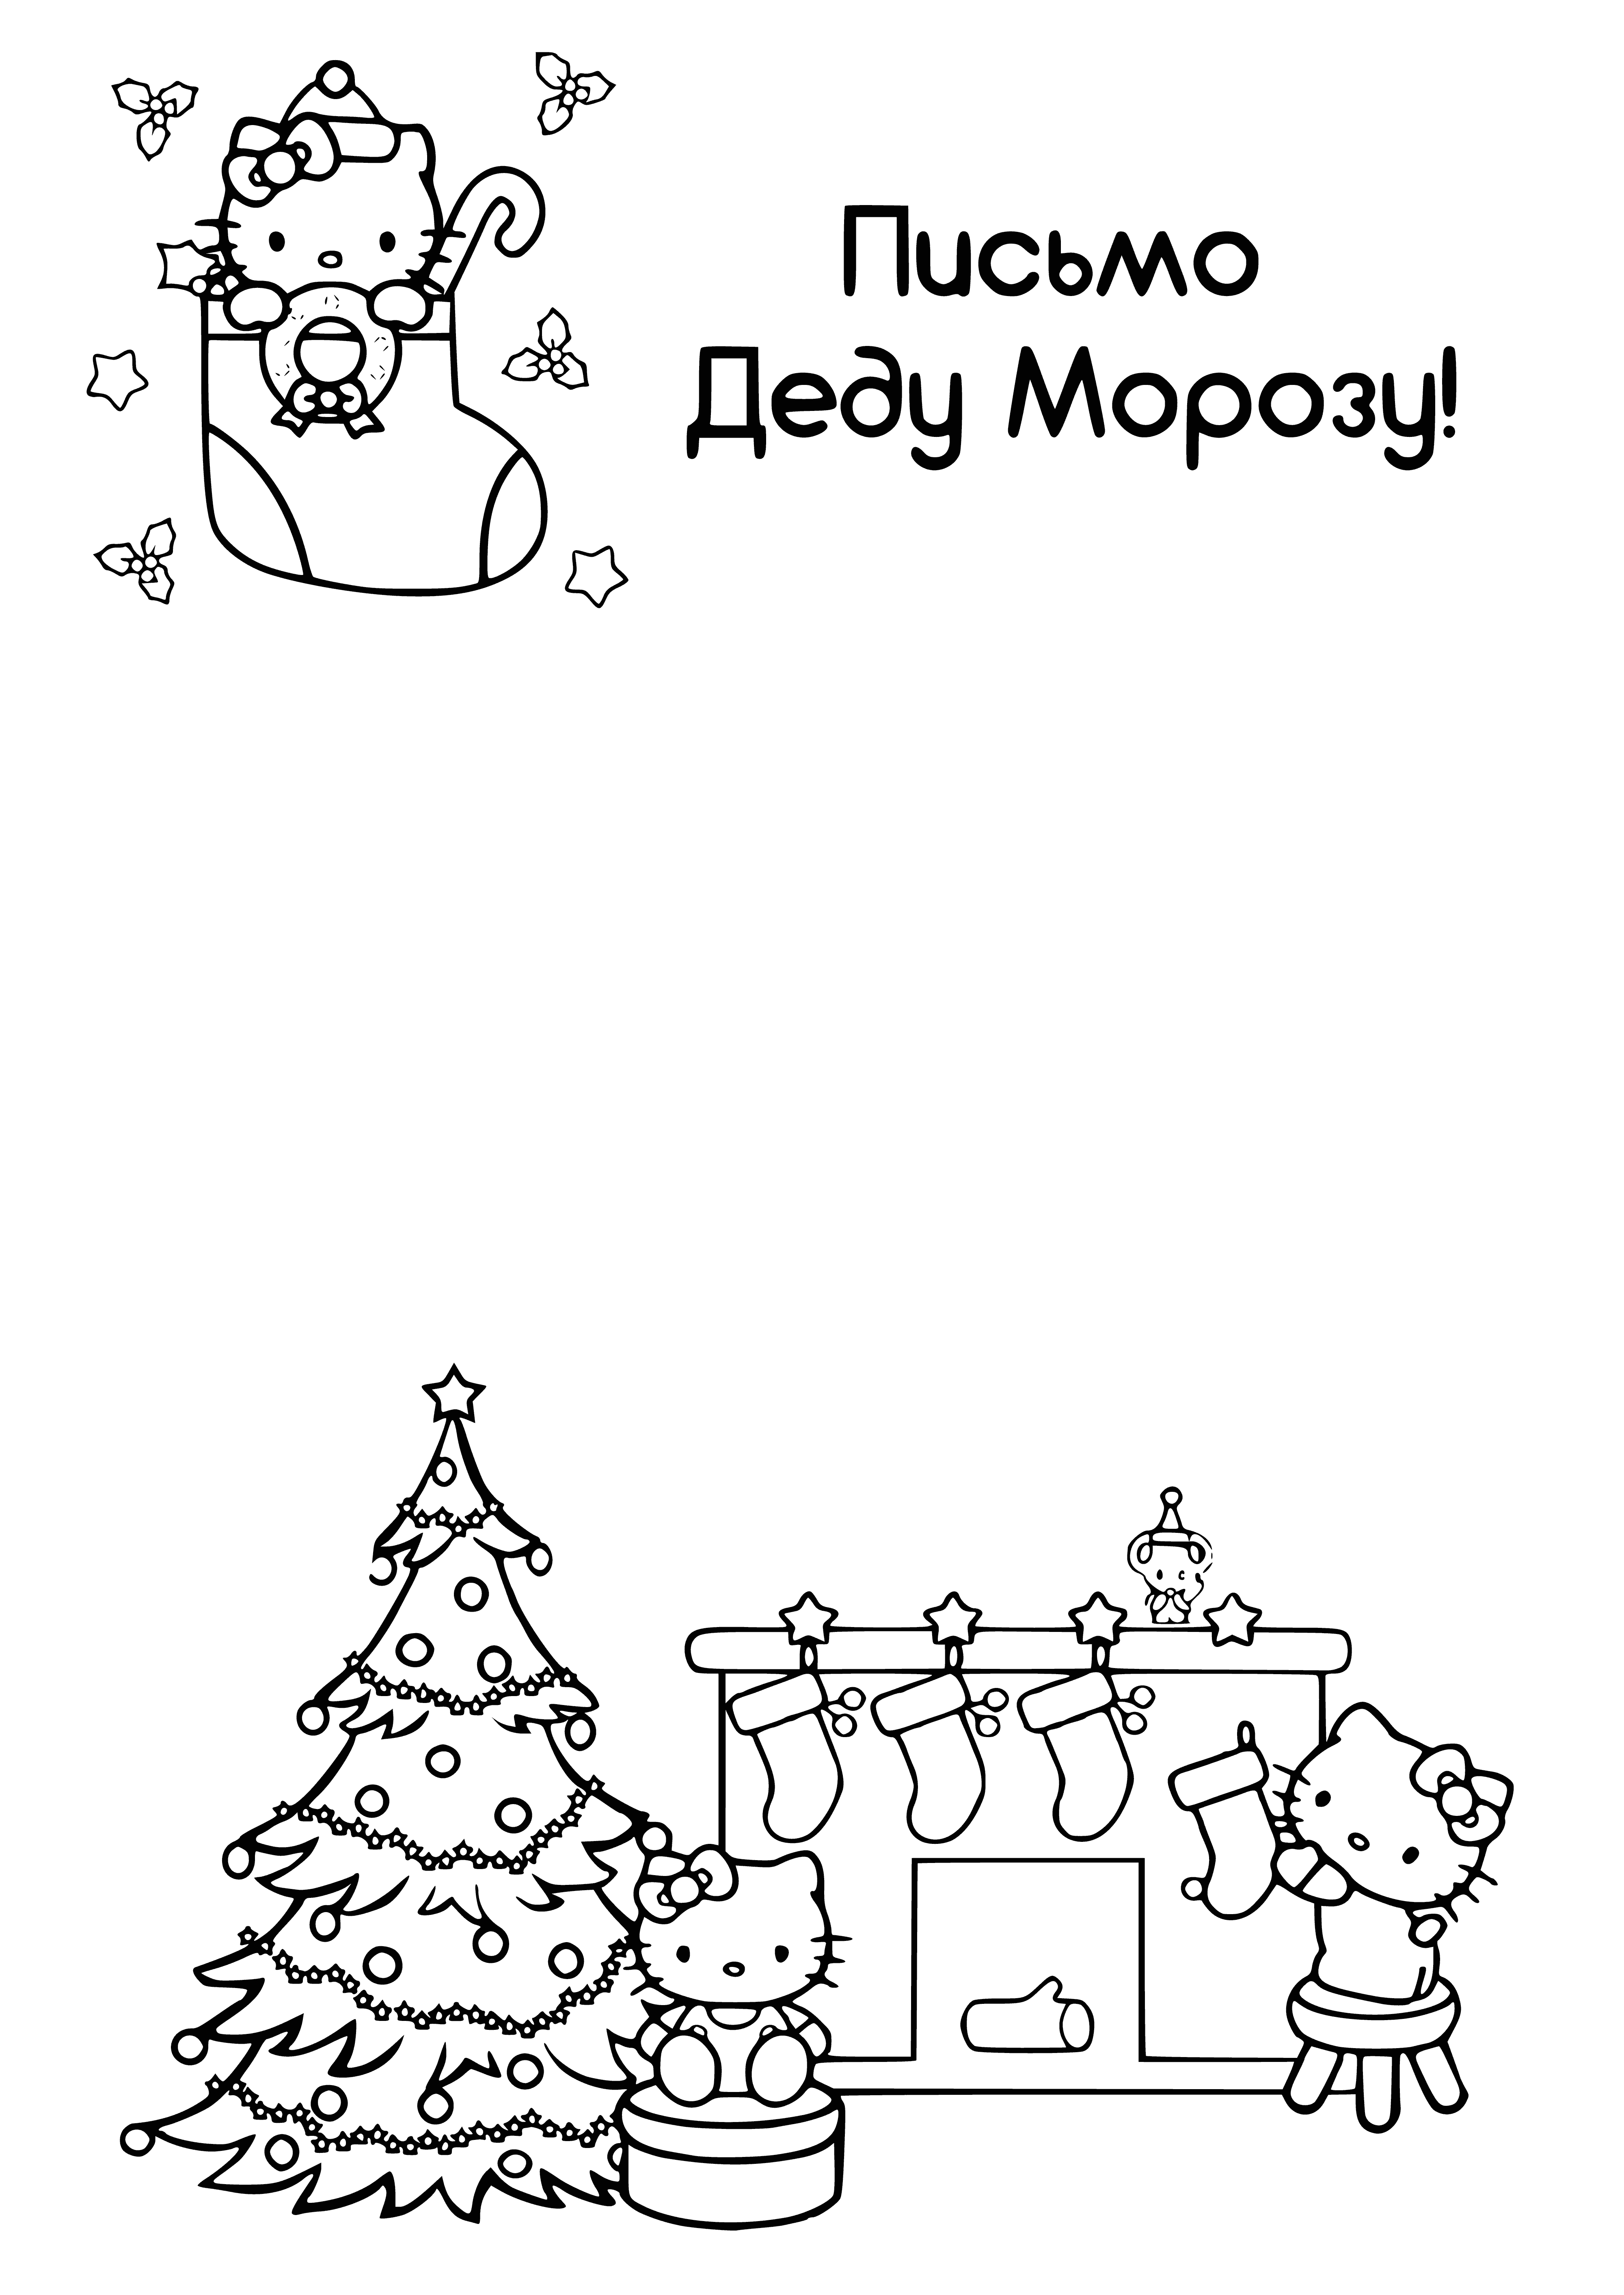 coloring page: Kid writes to Santa for a bike, PlayStation 4, and a puppy. Signed "Love, (name)."